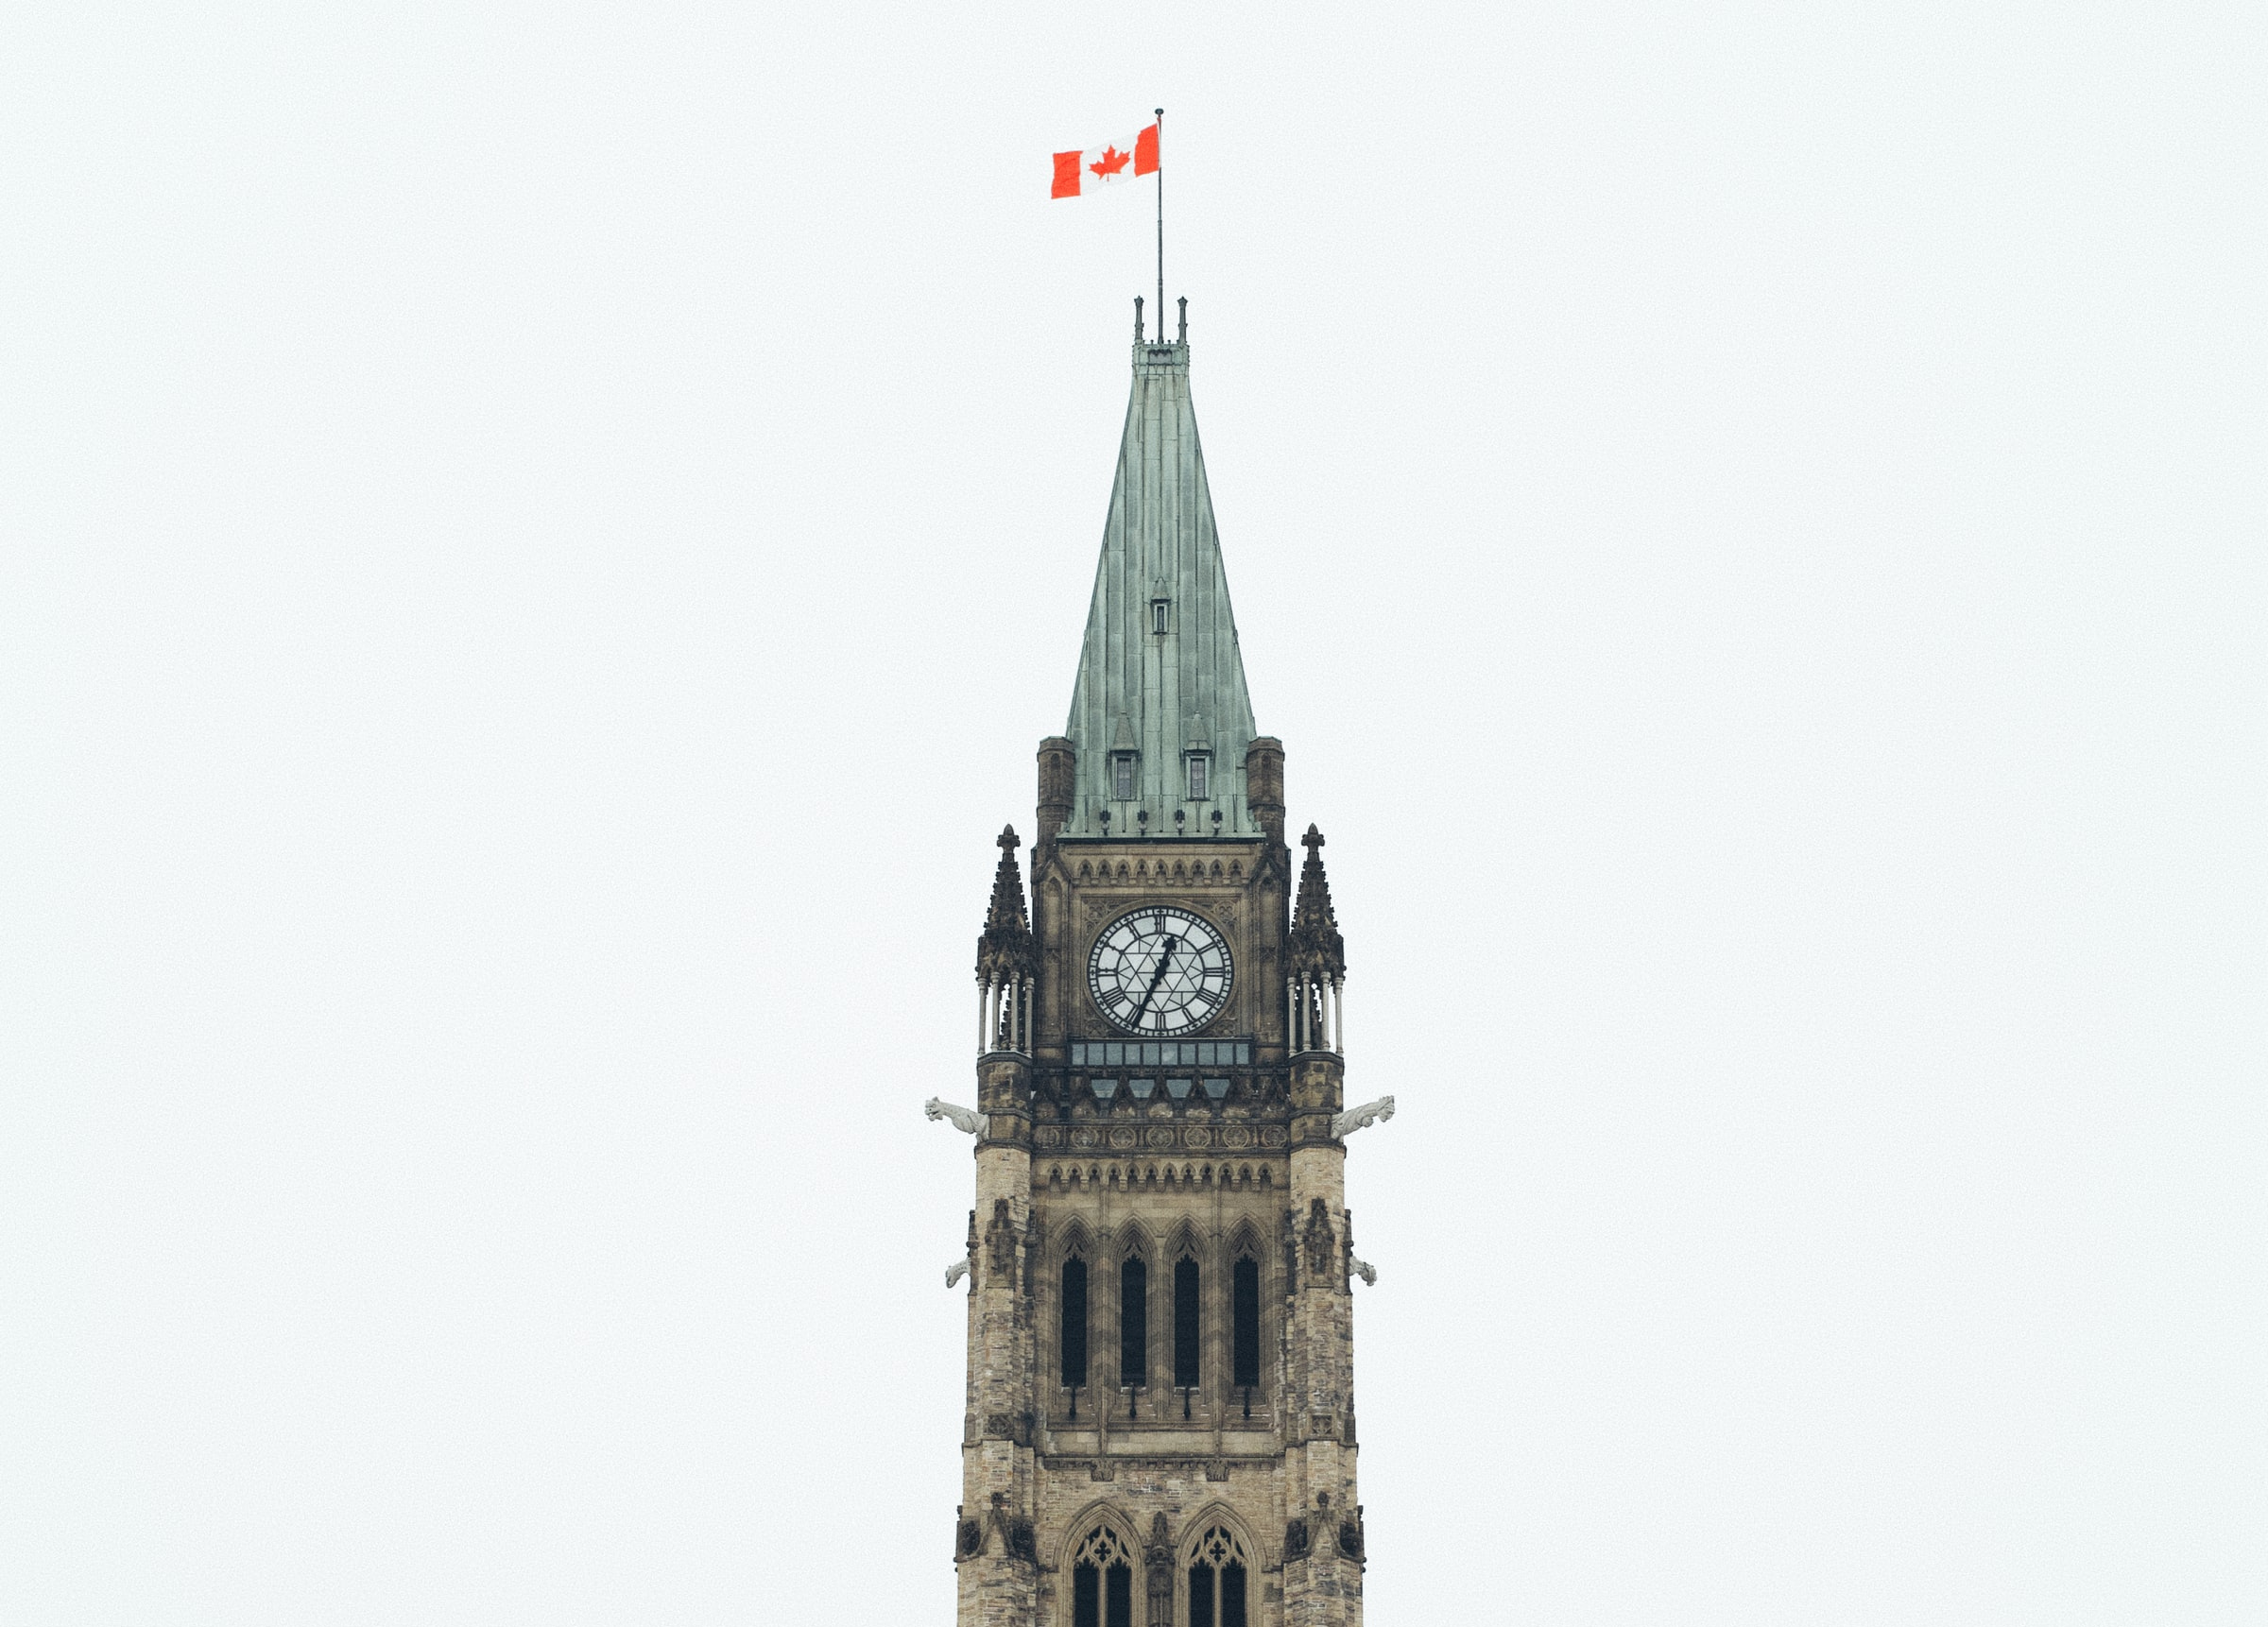 Photo of the Peace Tower on Parliament Hill in Ottawa.